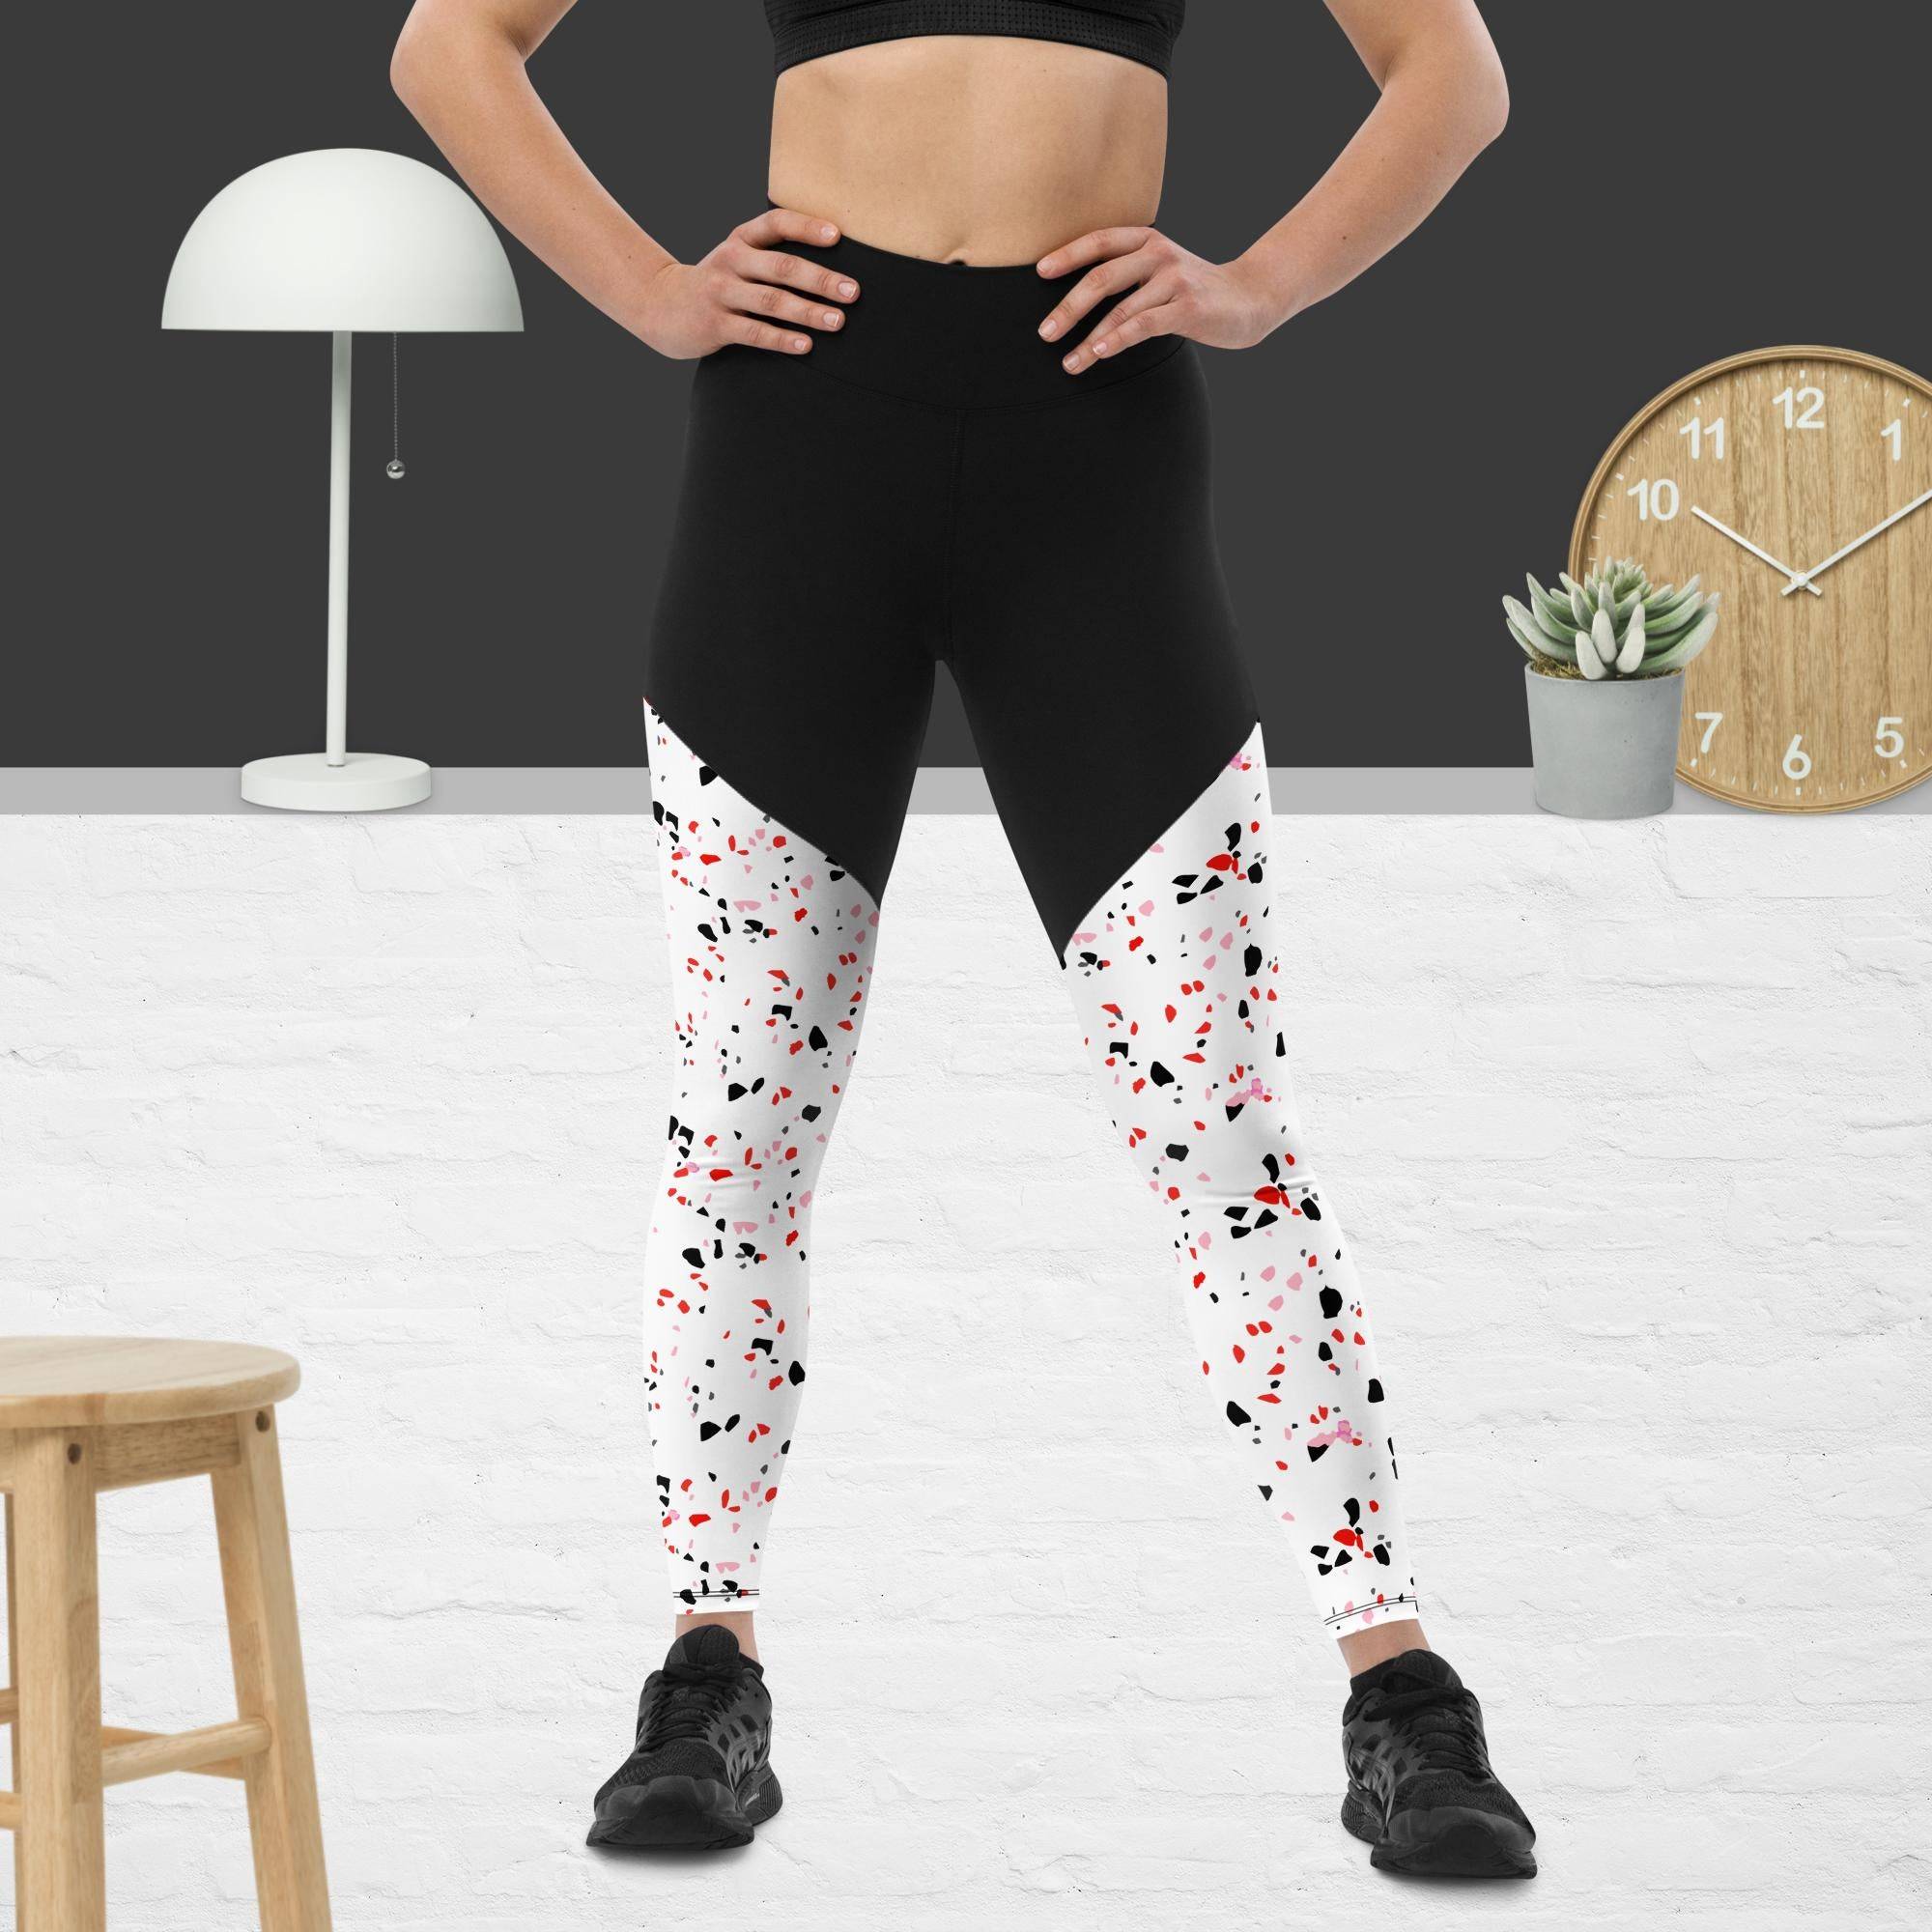 Radiant Semi-compression sports leggings with small pocket in the back.